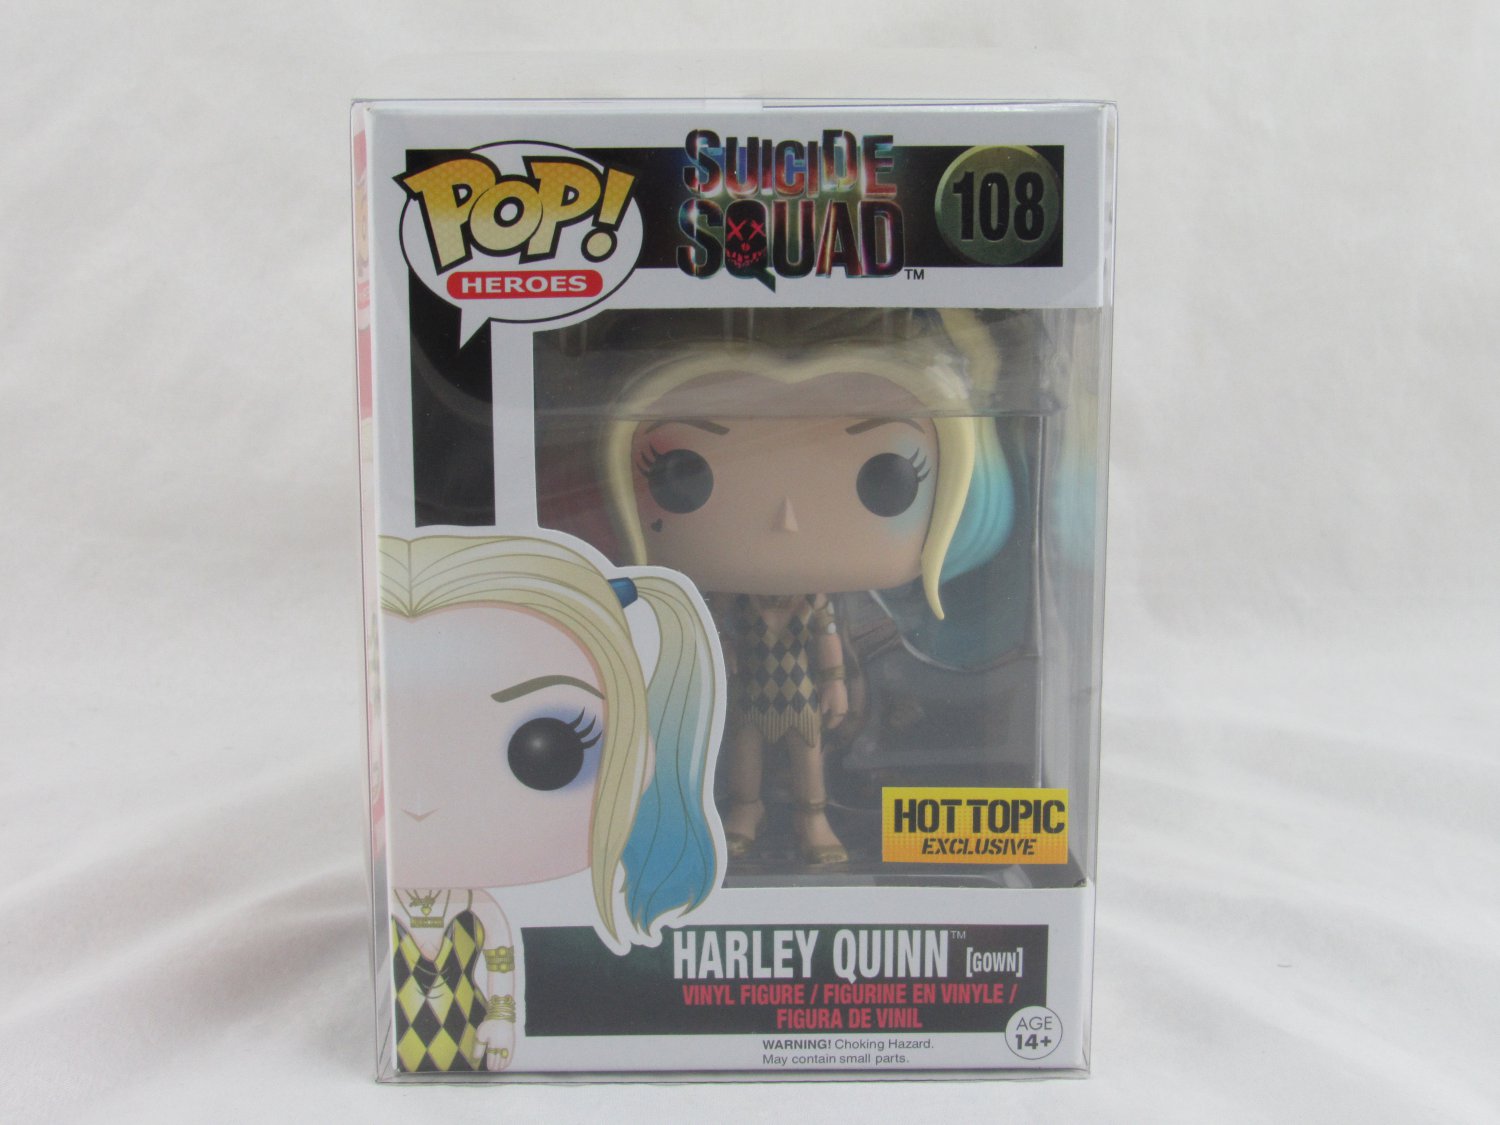 Funko Pop! Suicide Squad Harley Quinn (Gown) #108 Hot Topic Exclusive